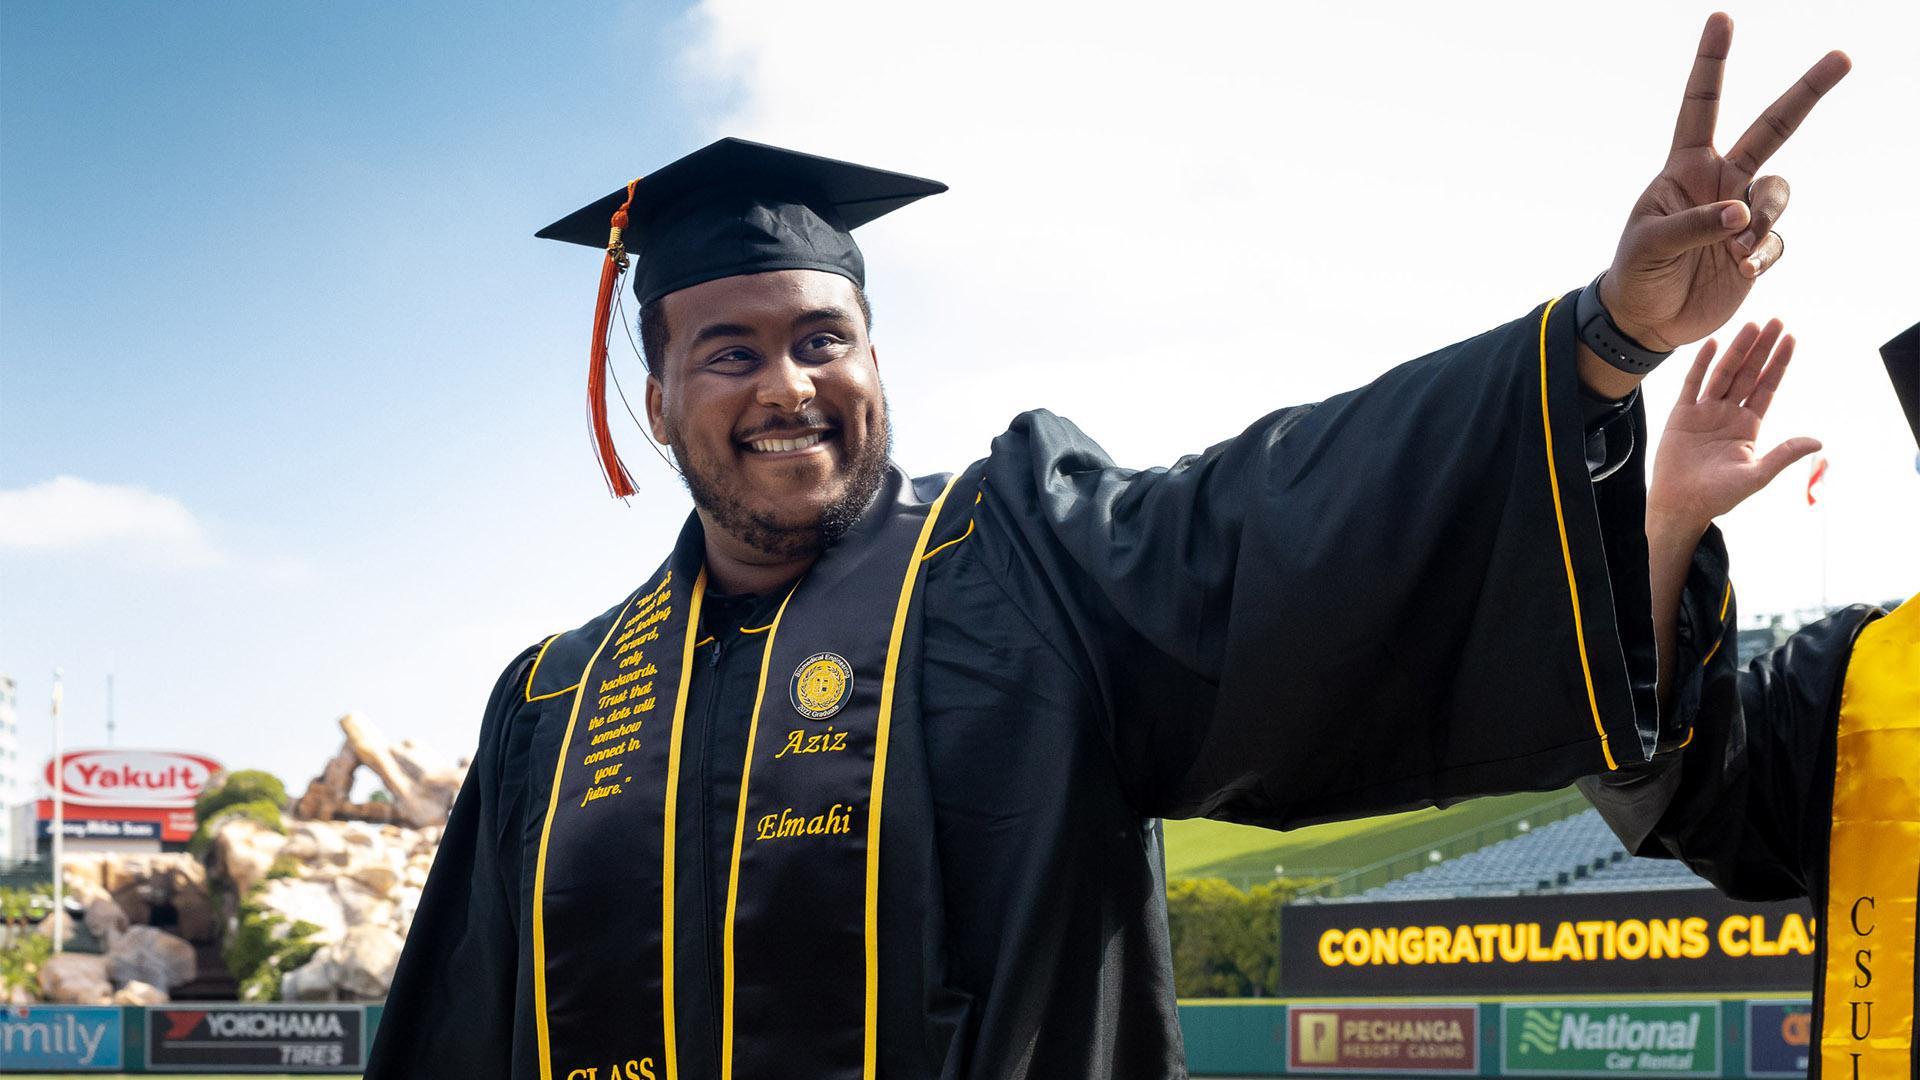 Male graduate gives peace sign with two fingers to Commencement crowd